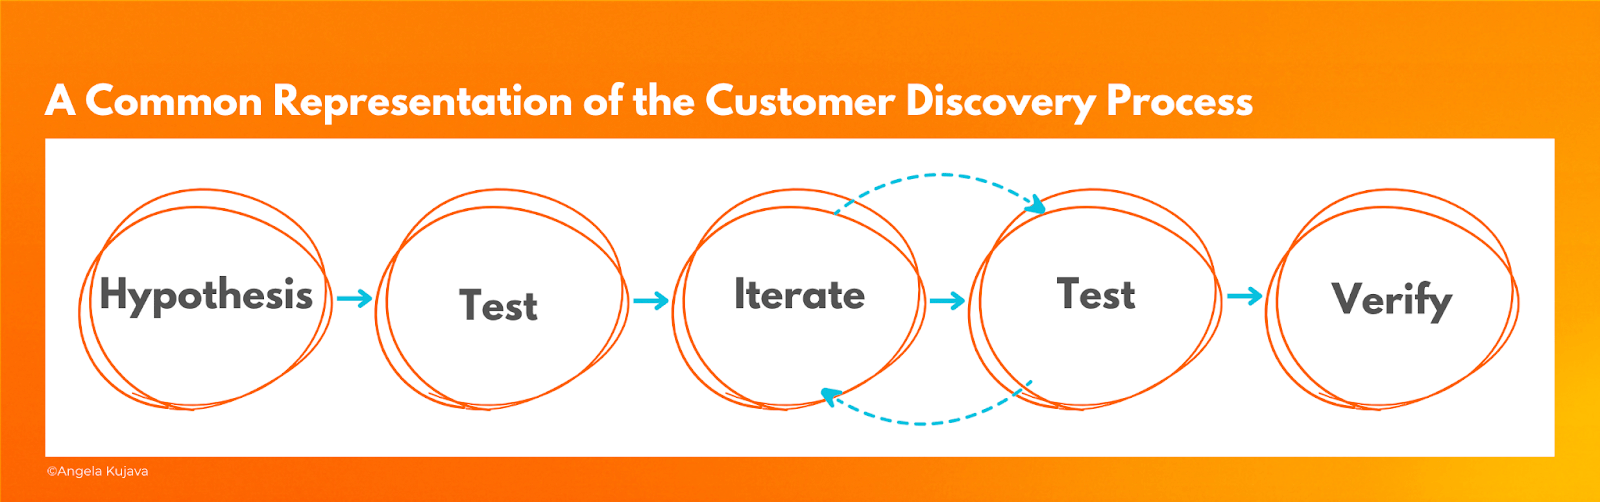 A Common Representation of the Customer Discovery Process